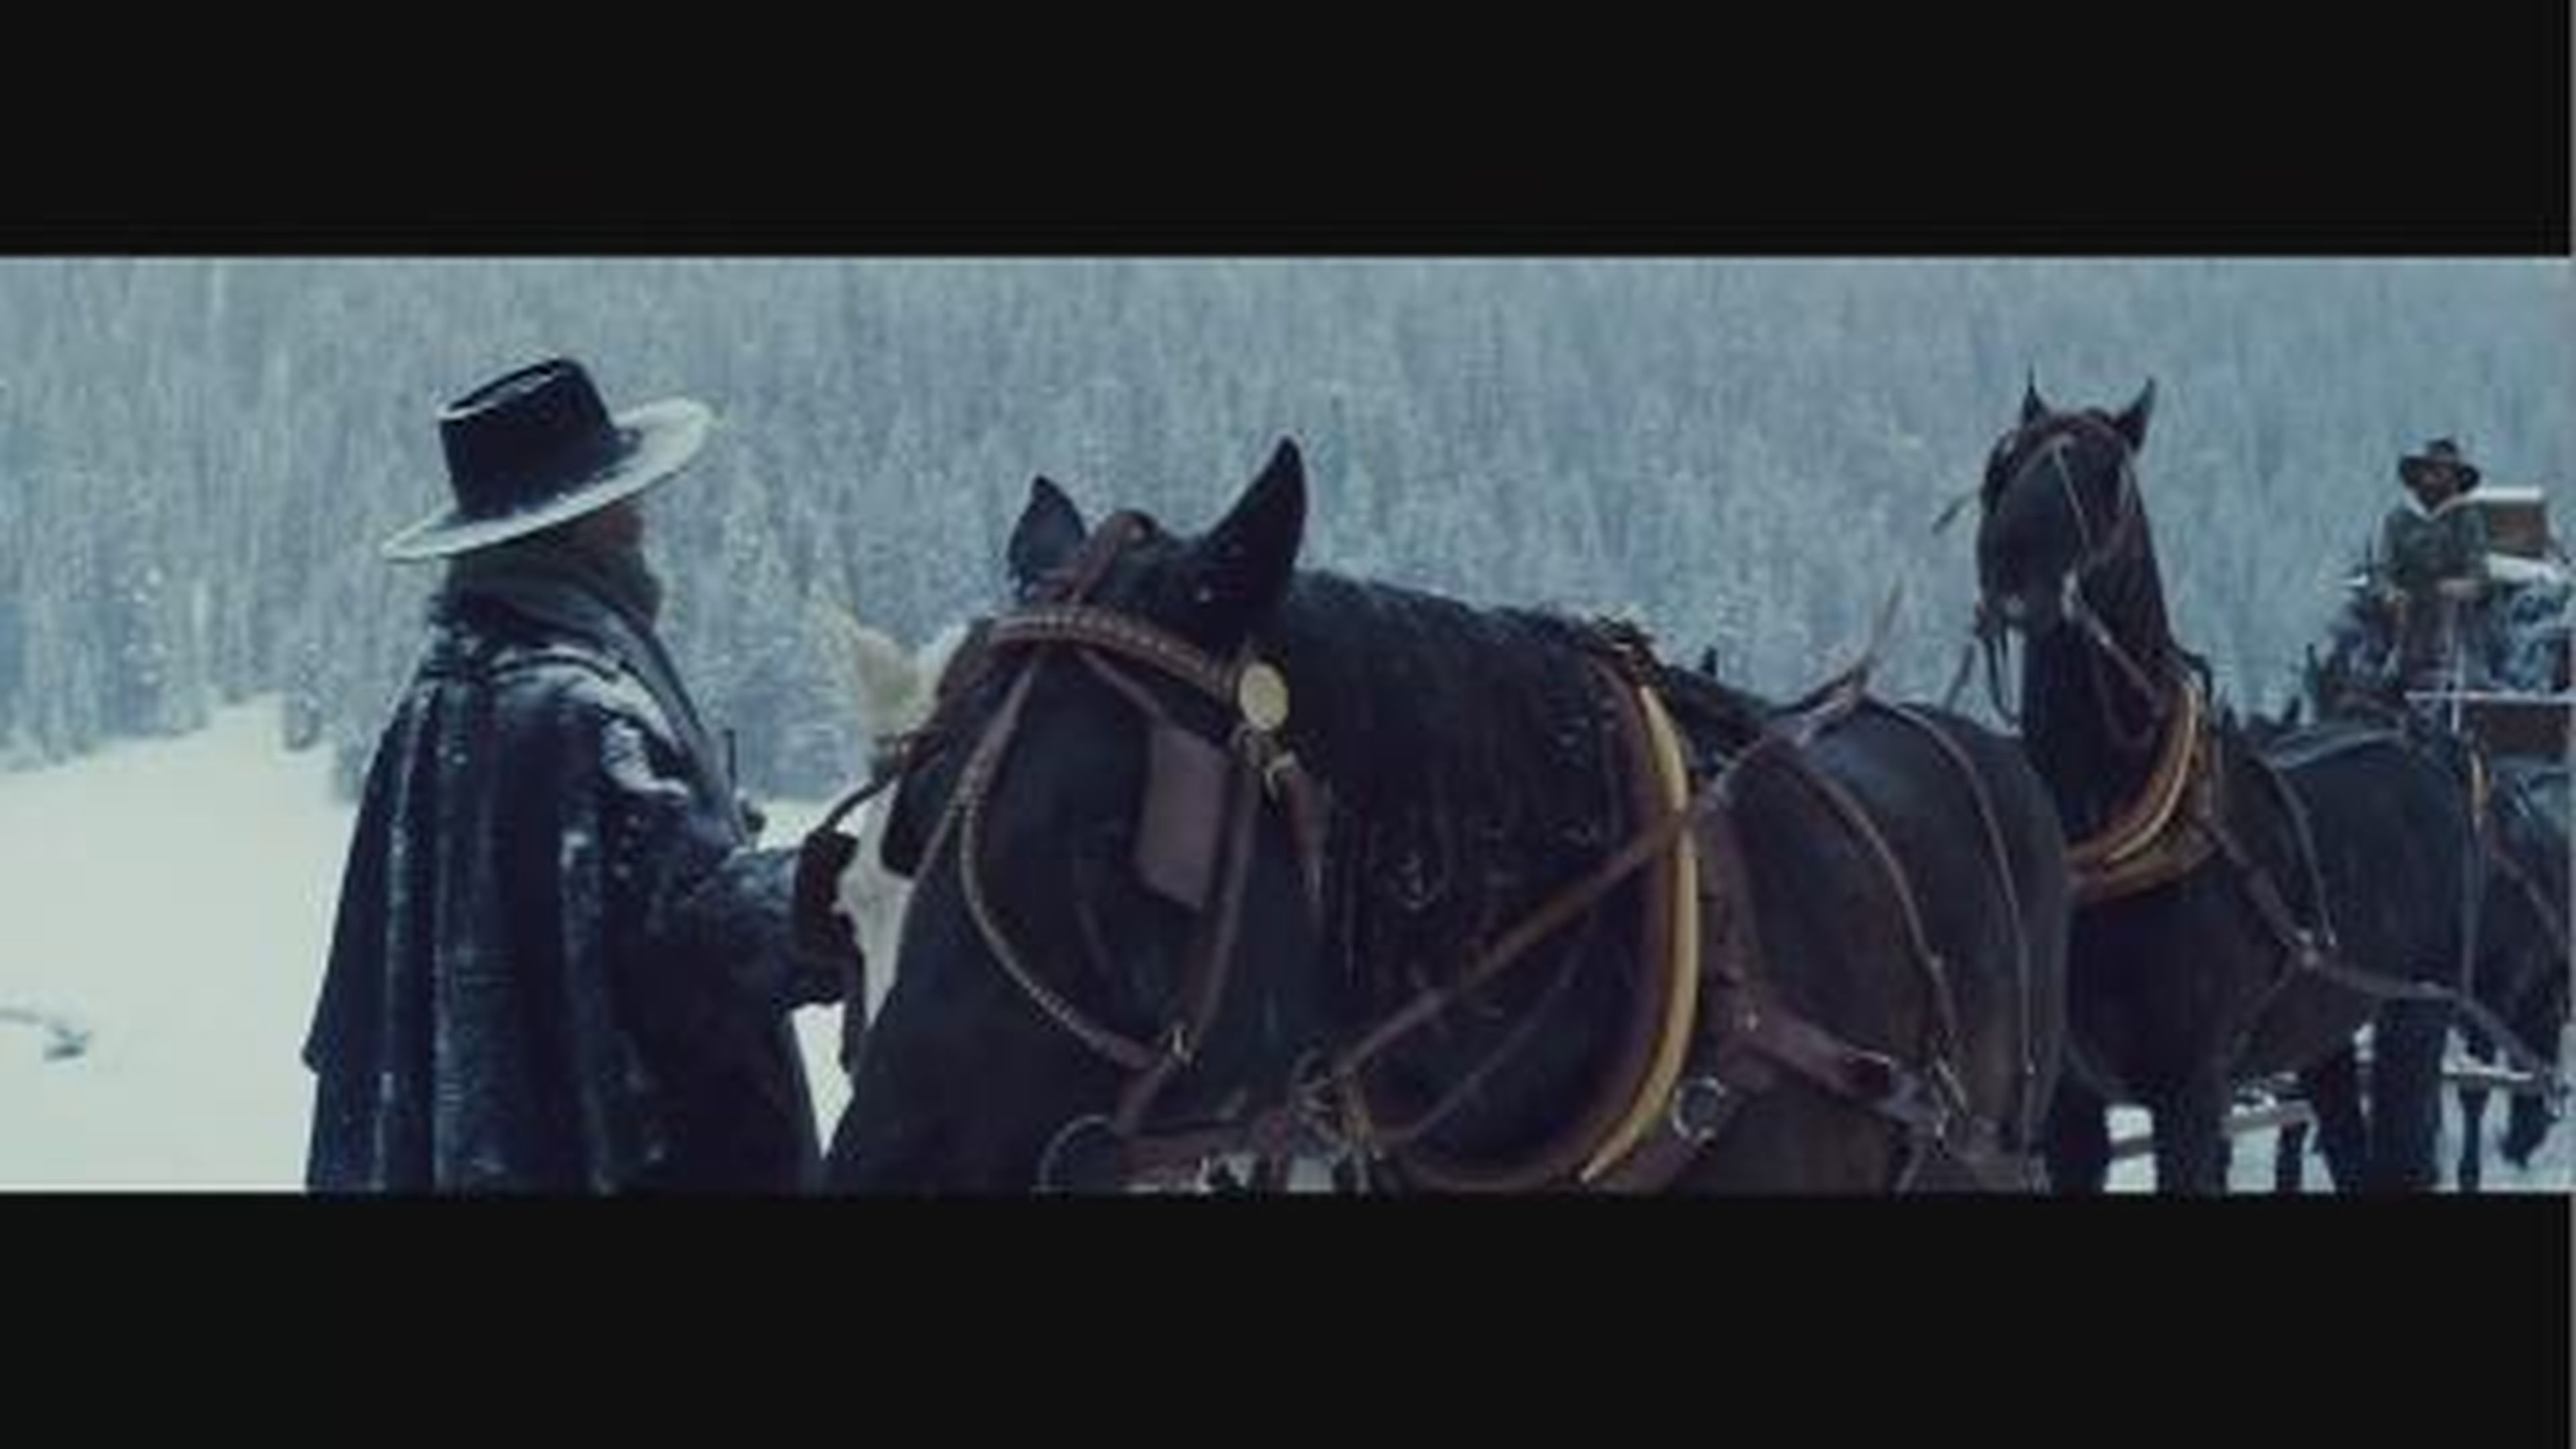 THE HATEFUL EIGHT Movie Clip - Got Room for One More- (2015) Samuel L. Jackson, Quentin Tarantino